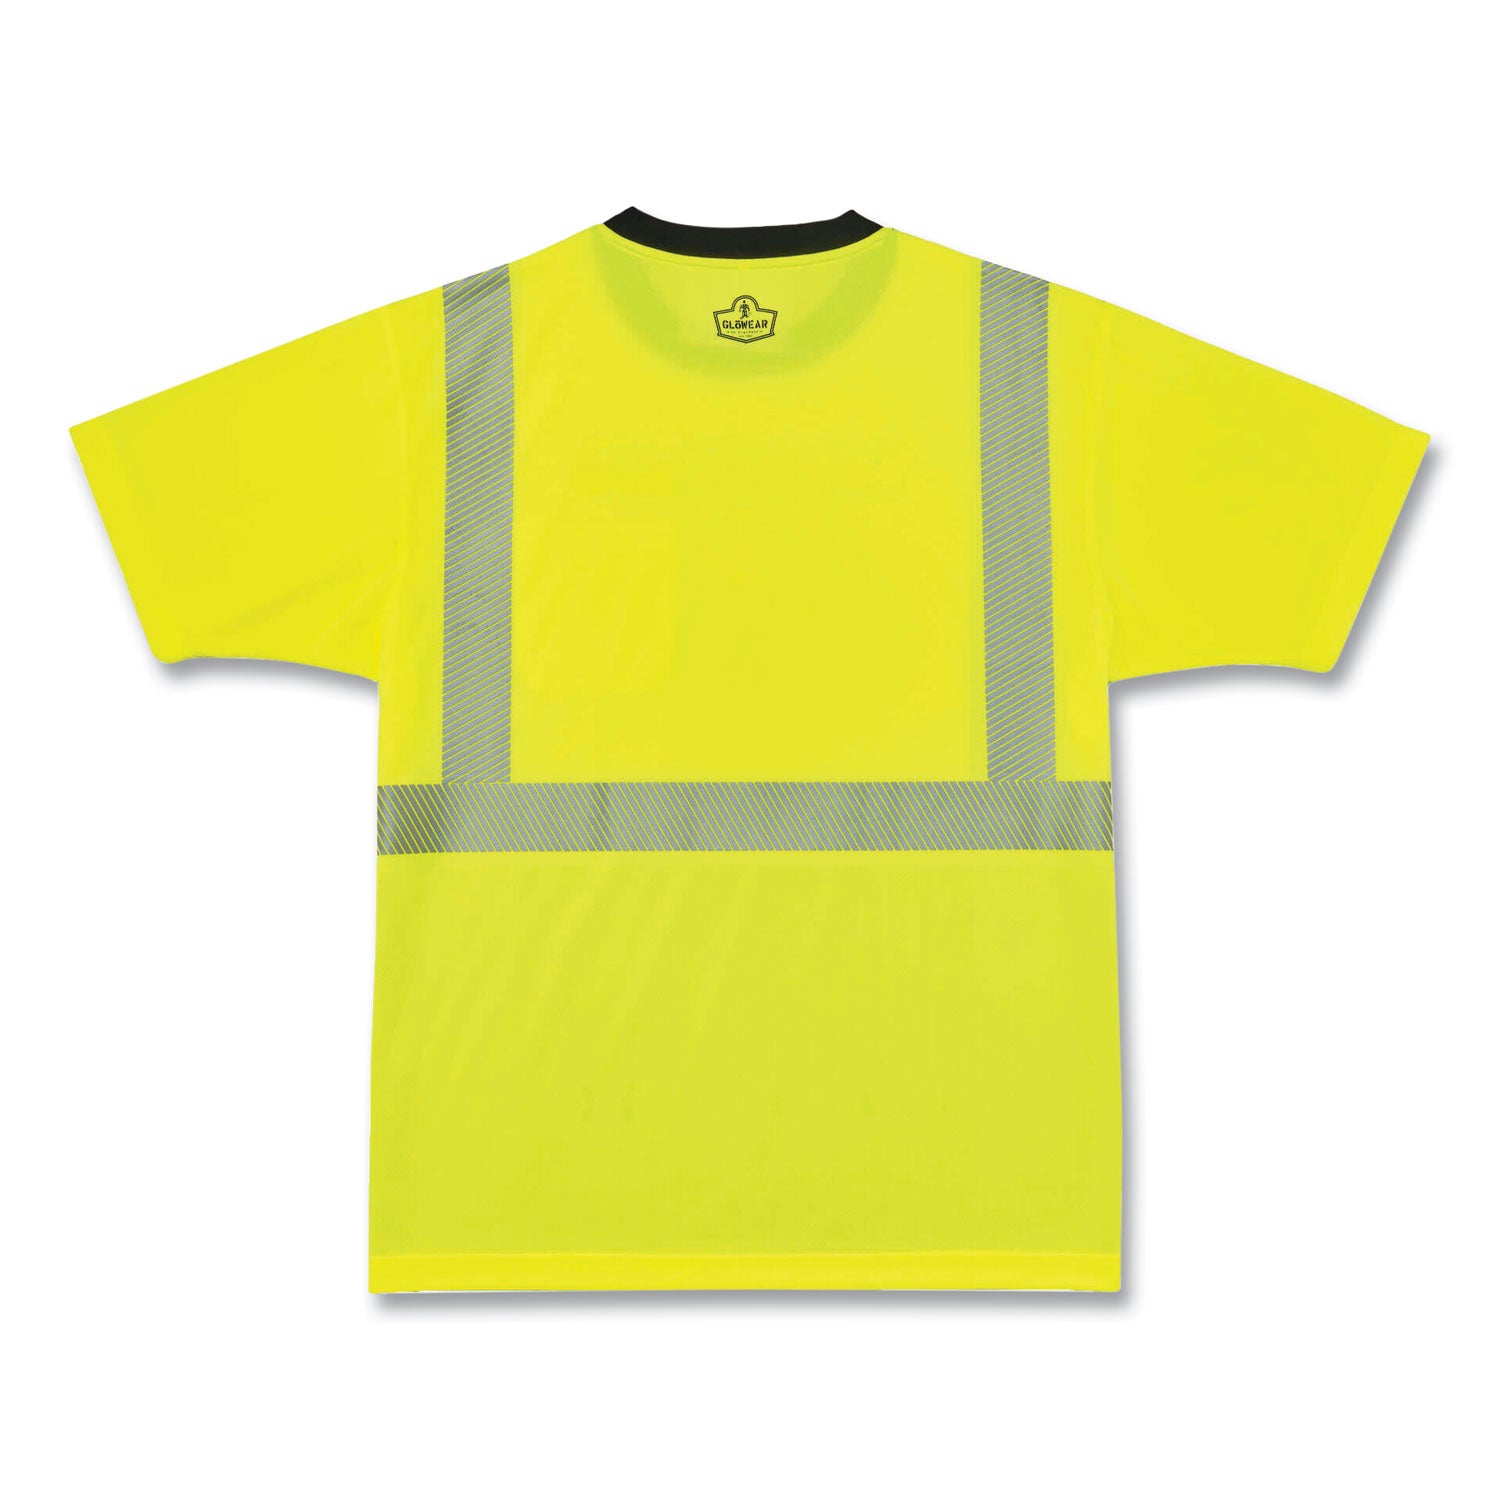 glowear-8280bk-class-2-performance-t-shirt-with-black-bottom-polyester-small-lime-ships-in-1-3-business-days_ego22532 - 2